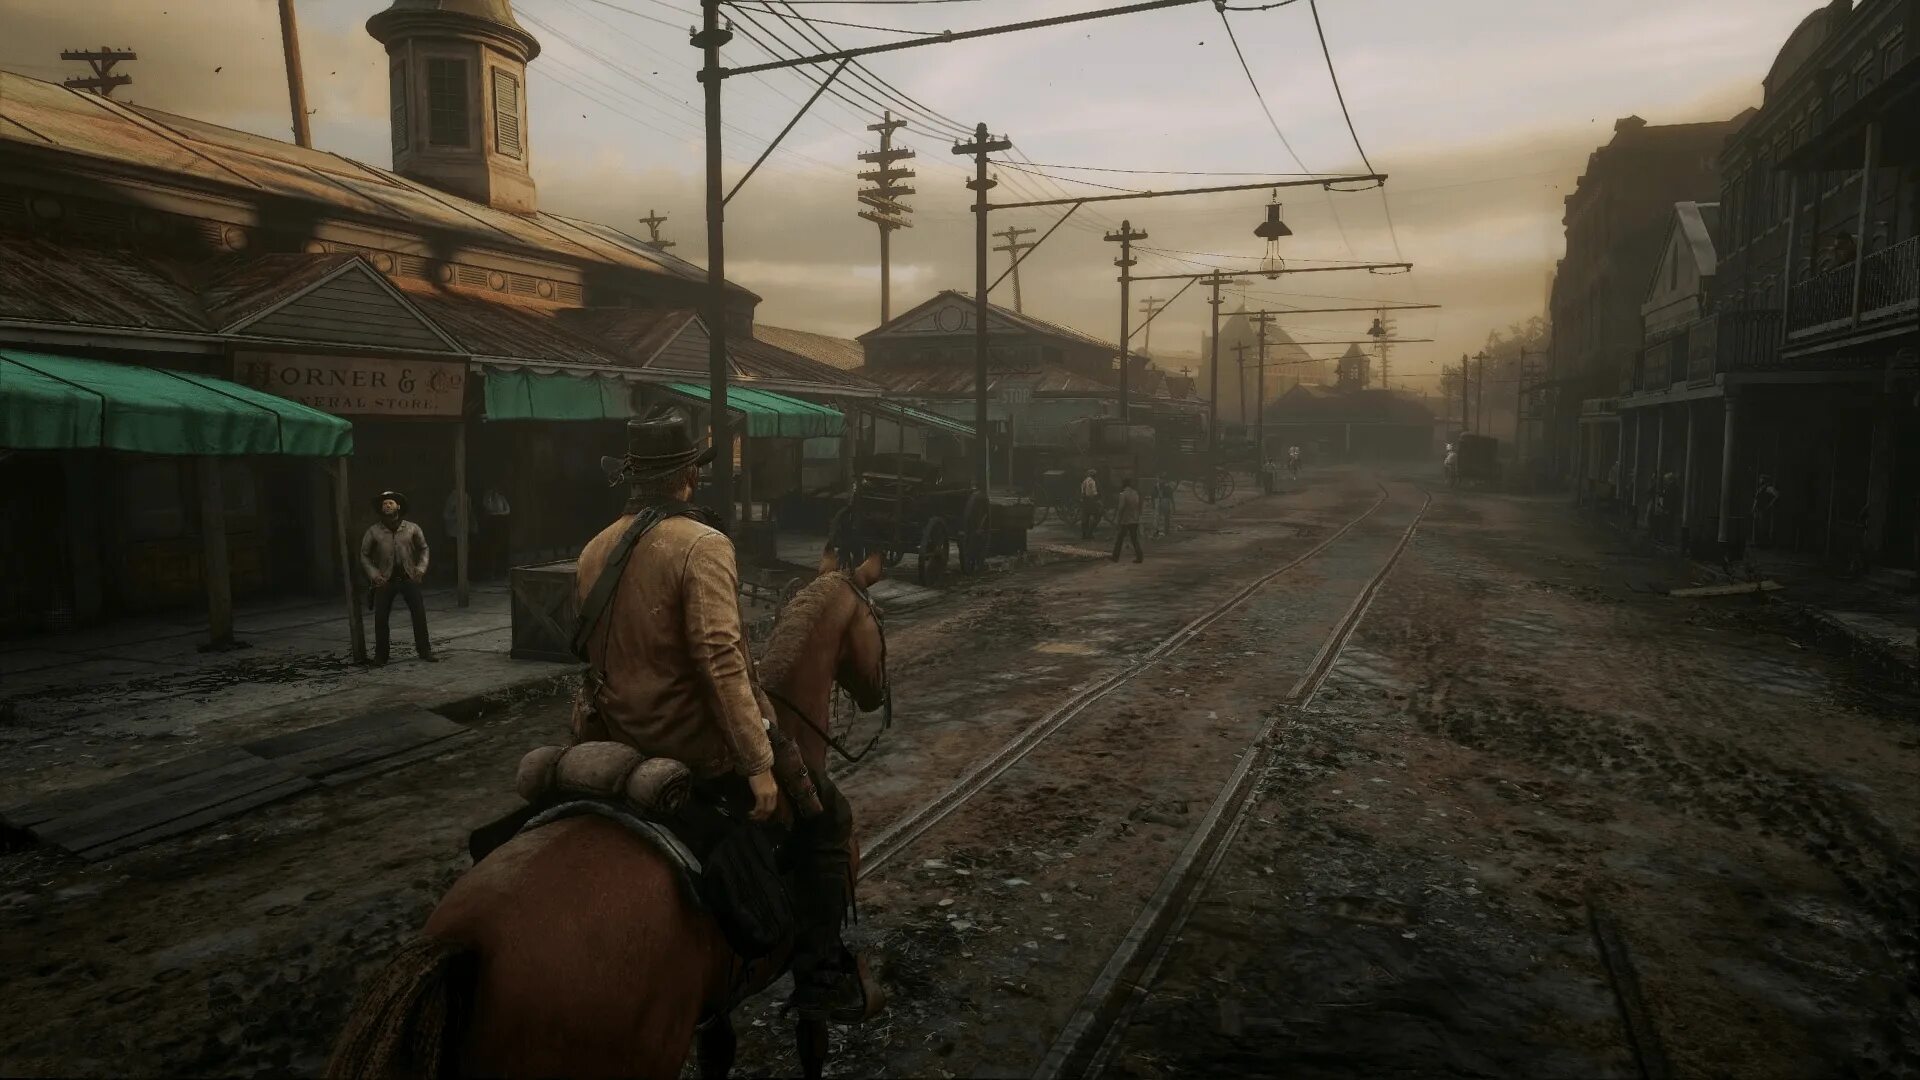 Игра Red Dead Redemption 2. Red Dead Redemption 2 Reshade. Red Dead Redemption 2 Графика. Red Dead Redemption 2 на максималках.